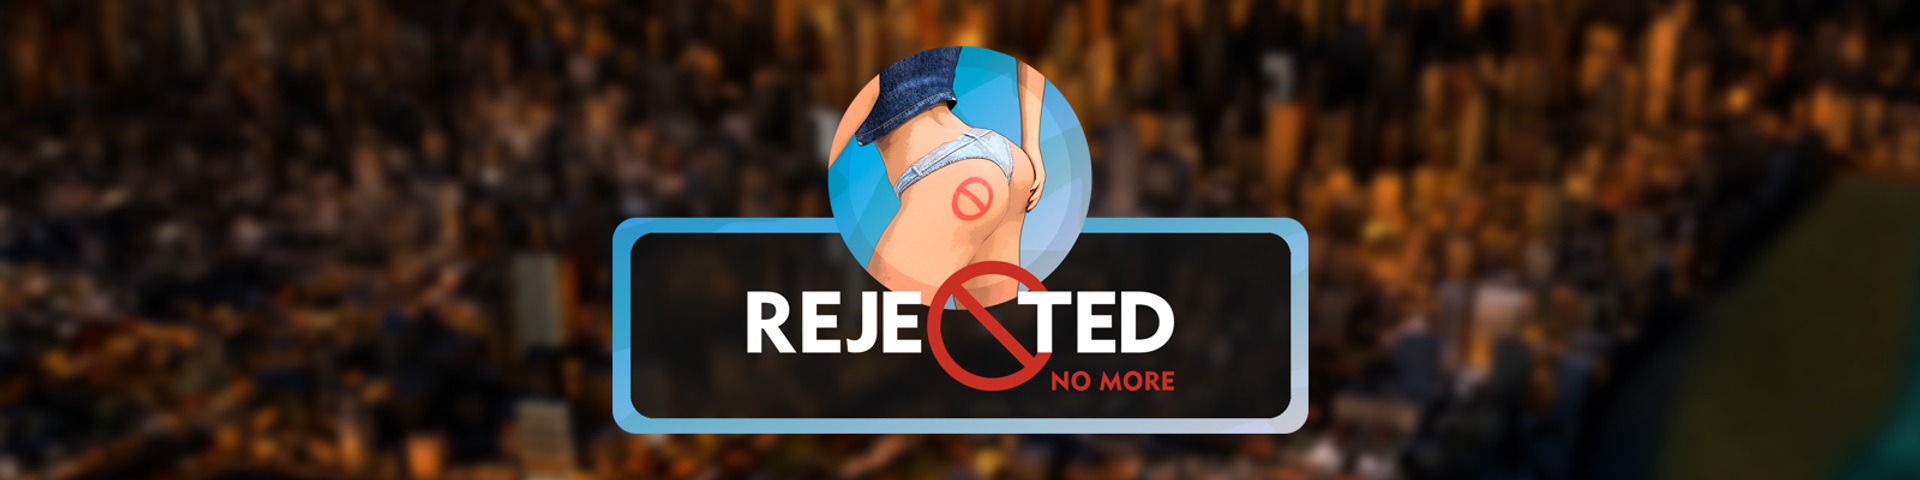 Rejected No More poster